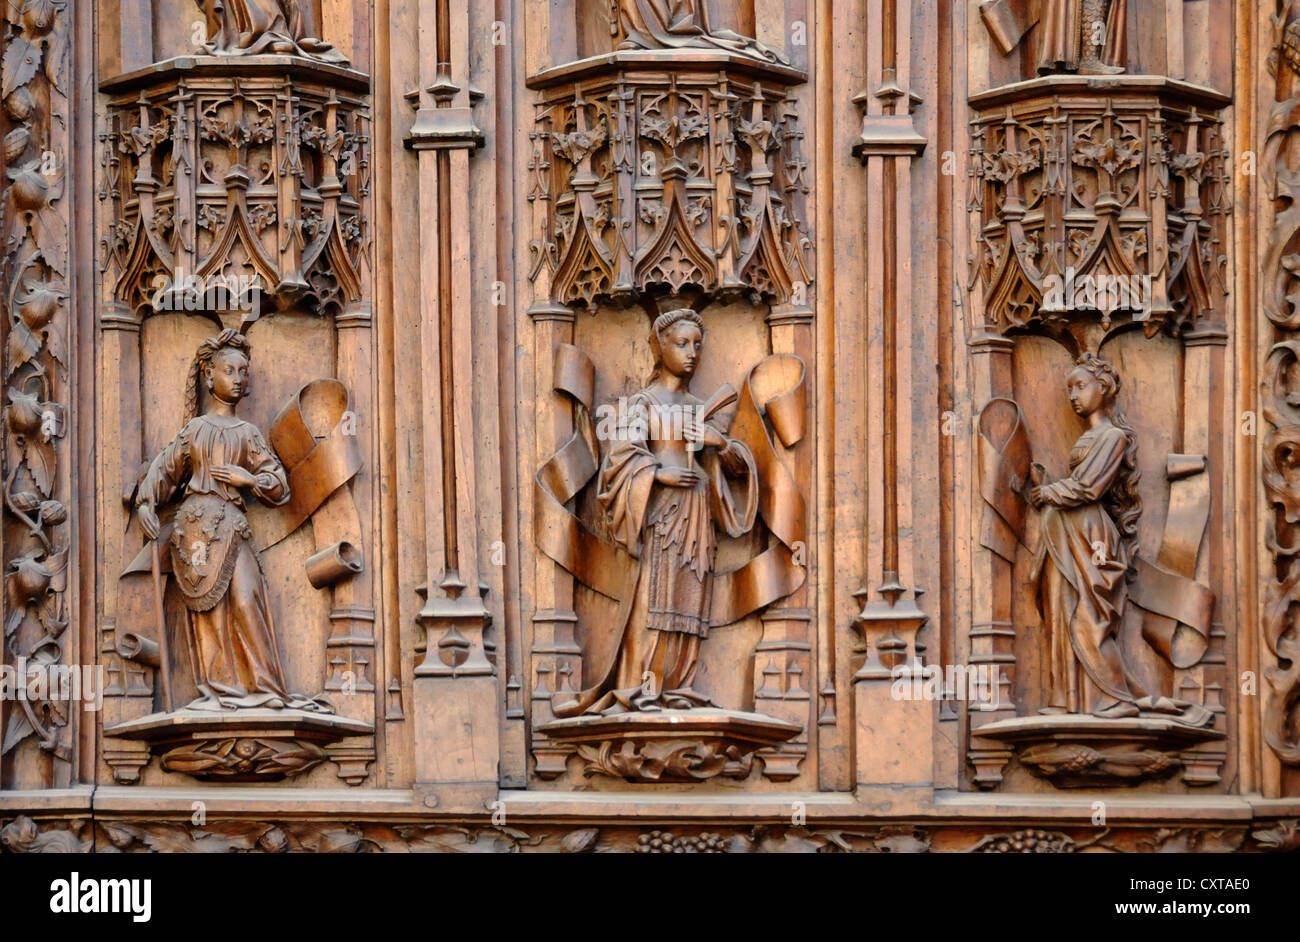 Carved Walnut Medieval Door (1505) Showing Three of 12 Sybils, or Pagan Fortune Tellers, Aix-en-Provence Saint Sauveur Cathedral Provence France Stock Photo